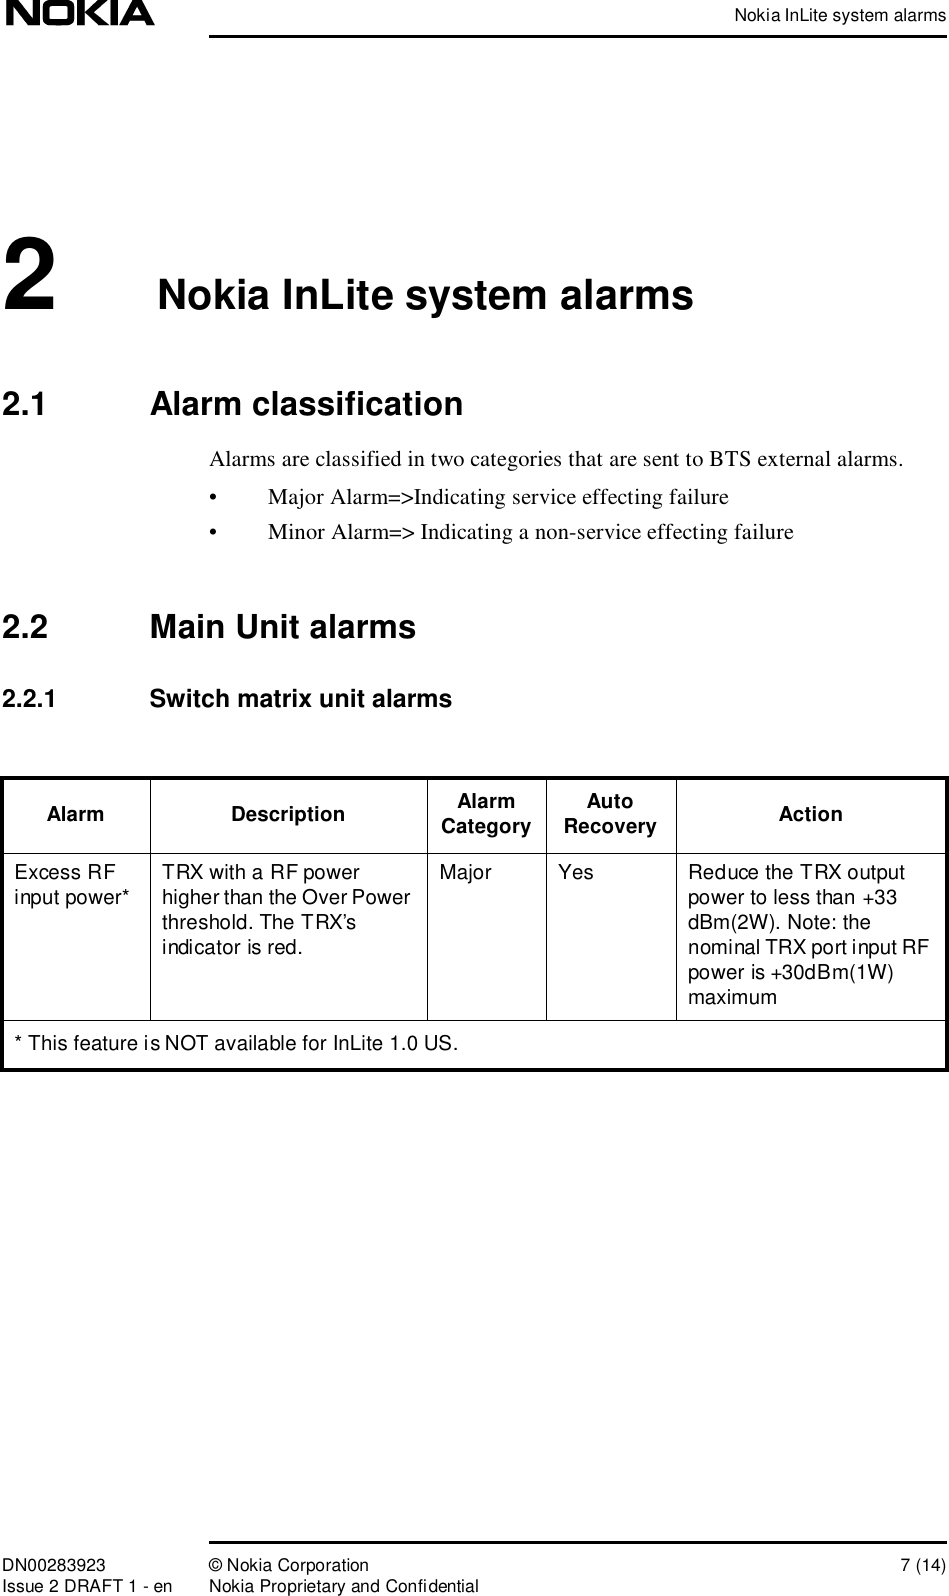 Nokia InLite system alarmsDN00283923 © Nokia Corporation 7 (14)Issue 2 DRAFT 1 - en Nokia Proprietary and Confidential2Nokia InLite system alarms2.1  Alarm classificationAlarms are classified in two categories that are sent to BTS external alarms.•Major Alarm=&gt;Indicating service effecting failure•Minor Alarm=&gt; Indicating a non-service effecting failure2.2  Main Unit alarms2.2.1  Switch matrix unit alarmsAlarm Description Alarm Category Auto Recovery ActionExcess RF input power*TRX with a RF power higher than the Over Power threshold. The TRX’s indicator is red.MajorYes Reduce the TRX output power to less than +33 dBm(2W). Note: the nominal TRX port input RF power is +30dBm(1W) maximum* This feature is NOT available for InLite 1.0 US.